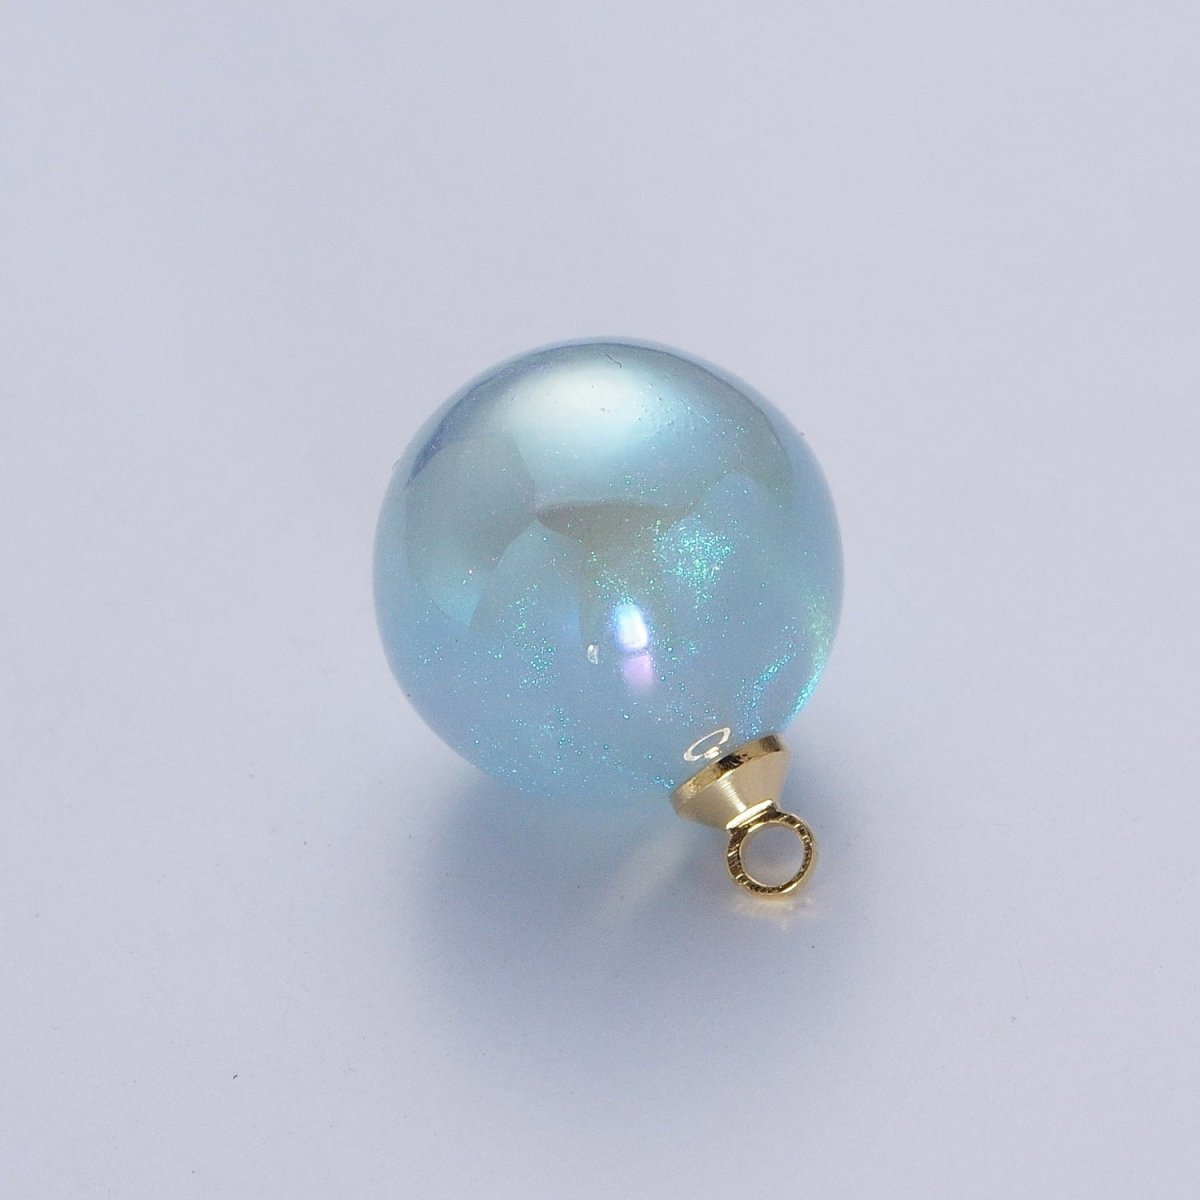 Iridescent Sparkly Blue & White Pearl Round Charm Pendant For Jewelry Making P-1558~P-1562 - DLUXCA